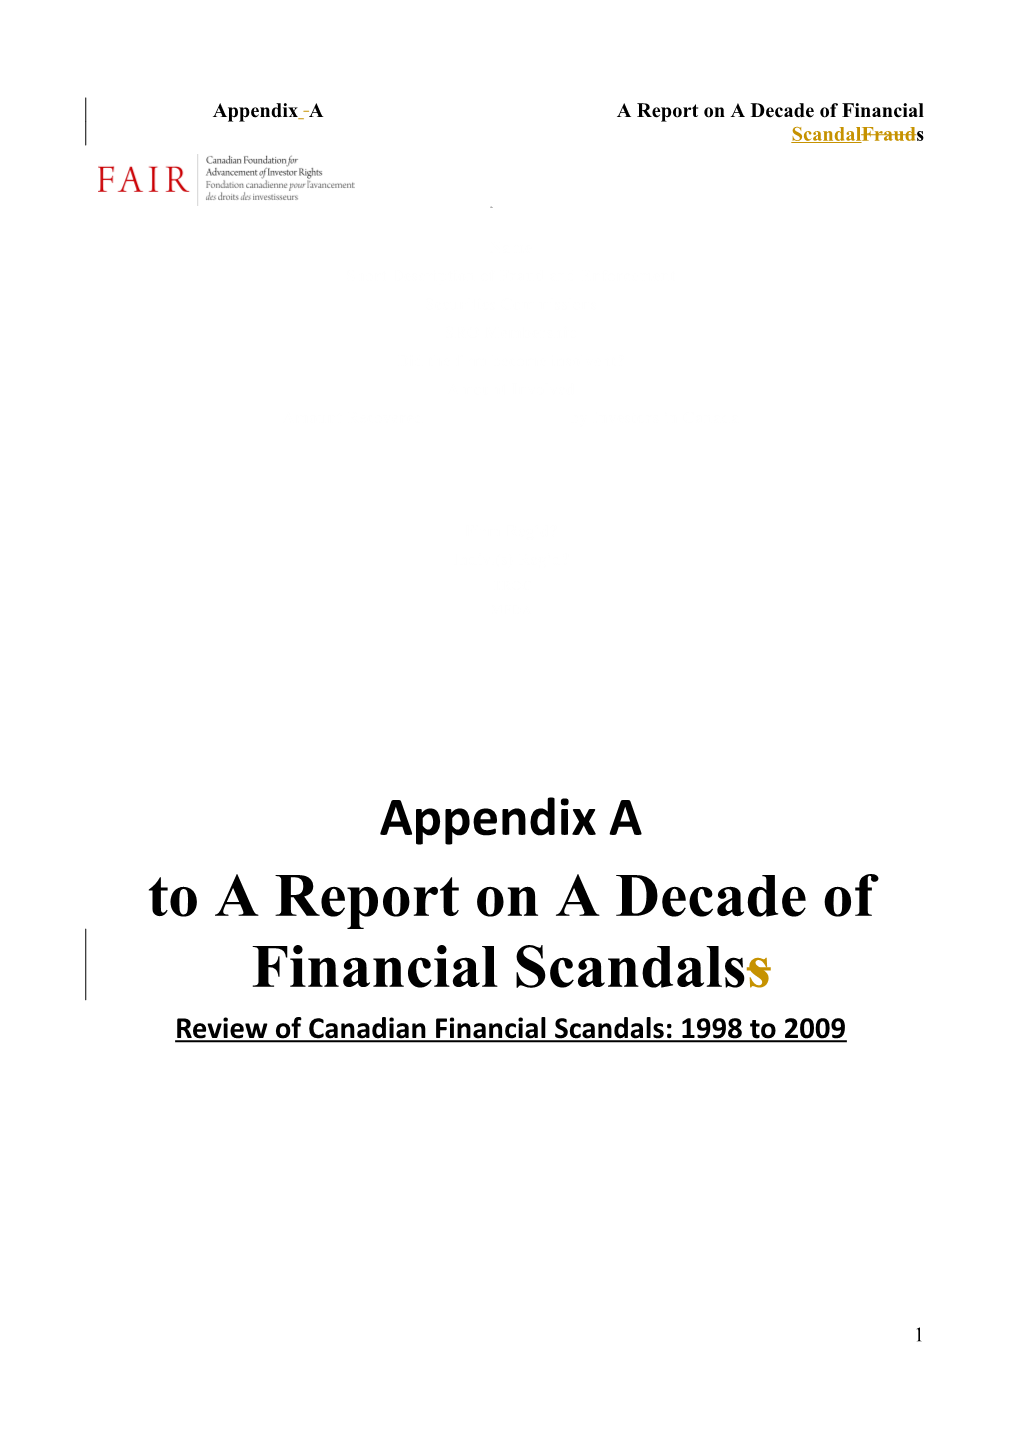 List of Financial Scandals in Canada